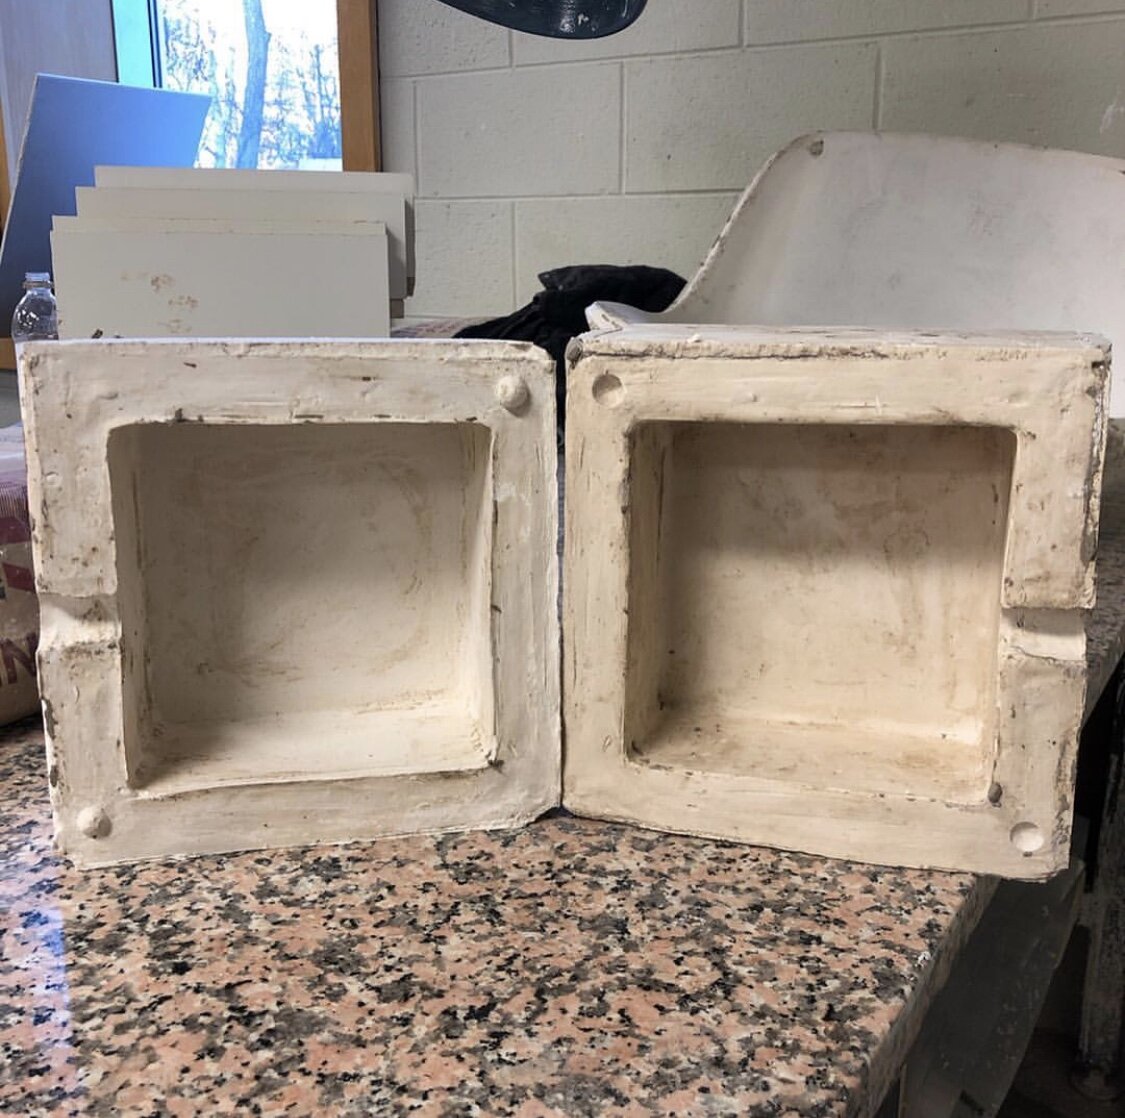 The finished mold